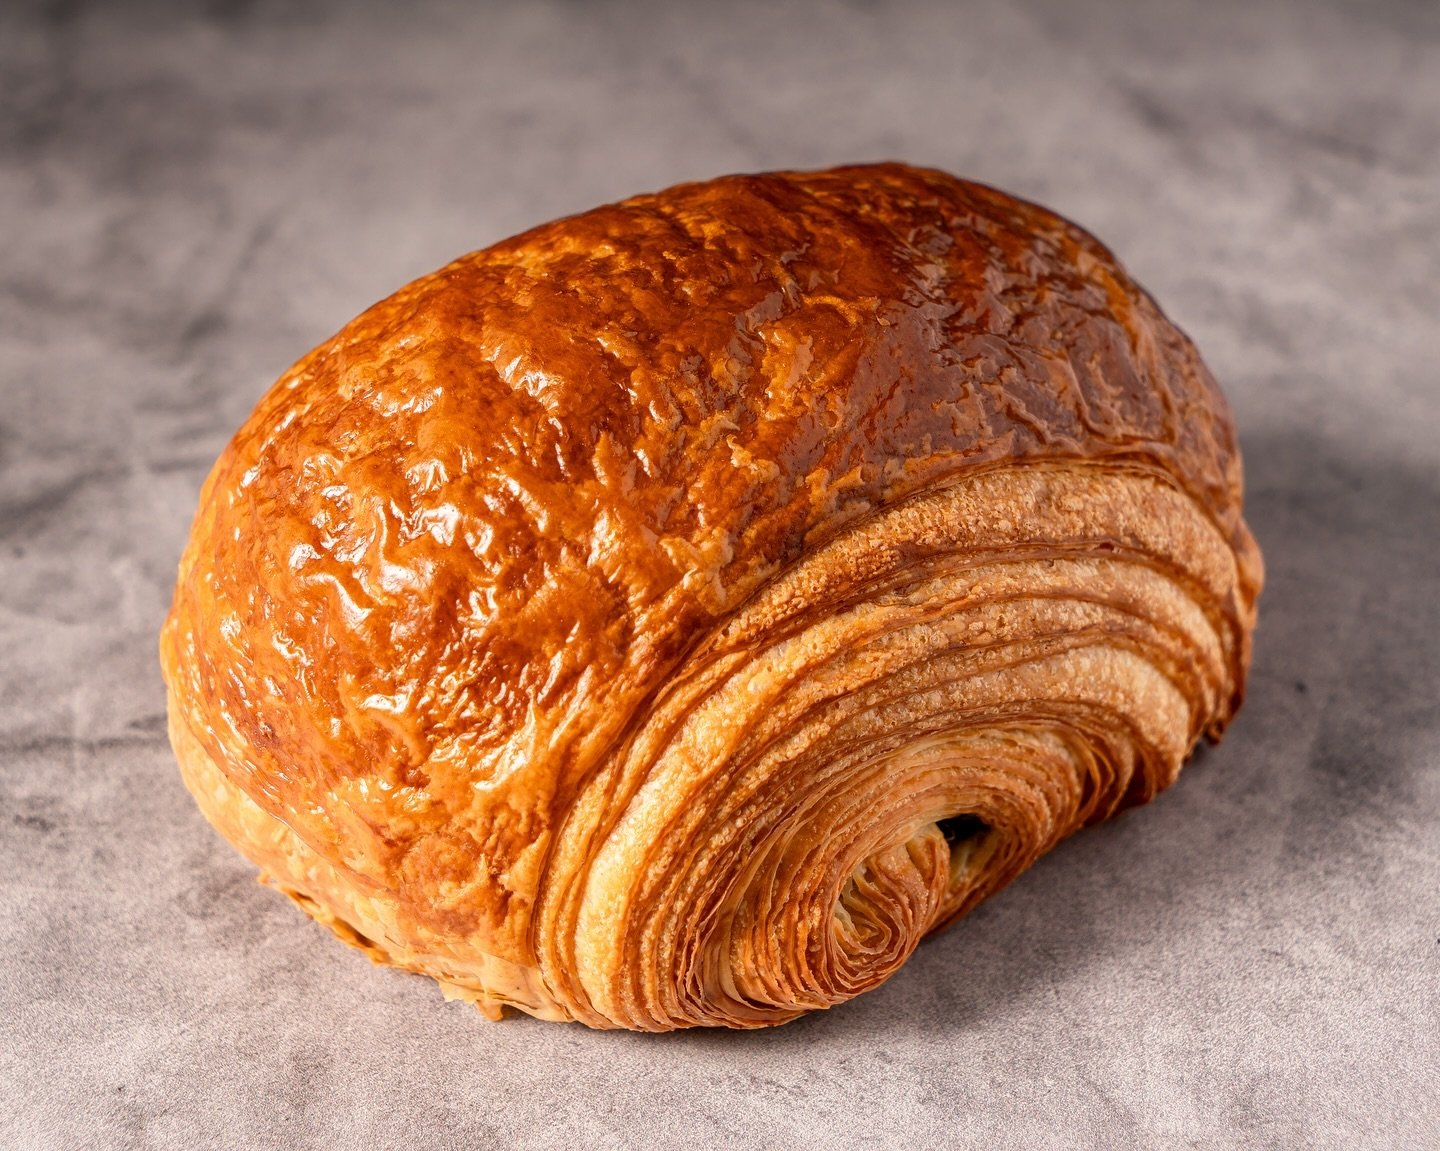 🍫🥐PAIN AU CHOCOLATE CROISSANT

FLAKY, BUTTERY, AND DANGEROUSLY CHOCOLATEY

It&rsquo;s the kind of pastry that makes you wonder if it&rsquo;s okay to have chocolate for breakfast &ndash; hint: it totally is! 😉👌 

Loved by all, a staple in our bake